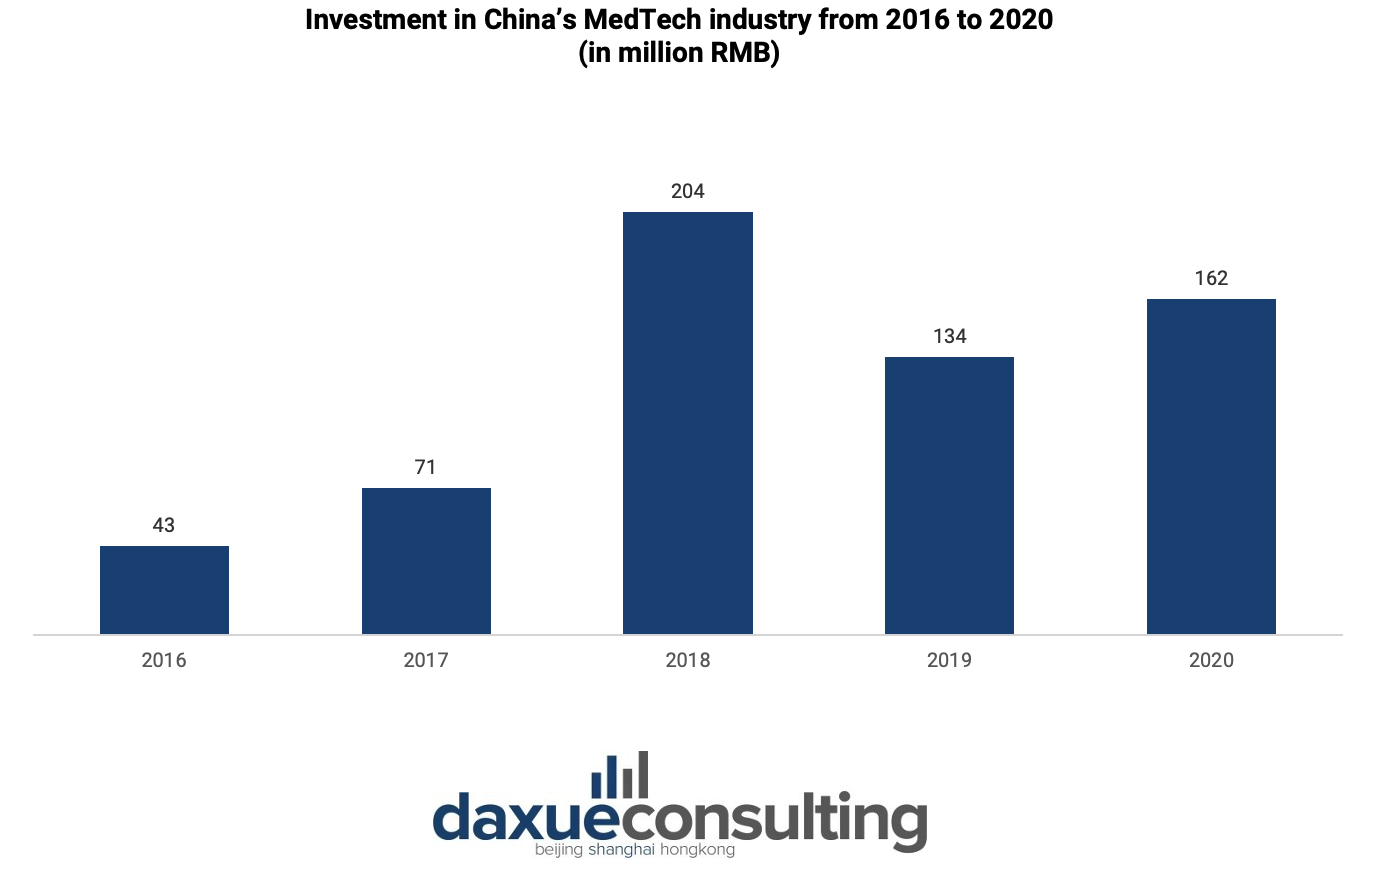 investments in China's medical technology industry